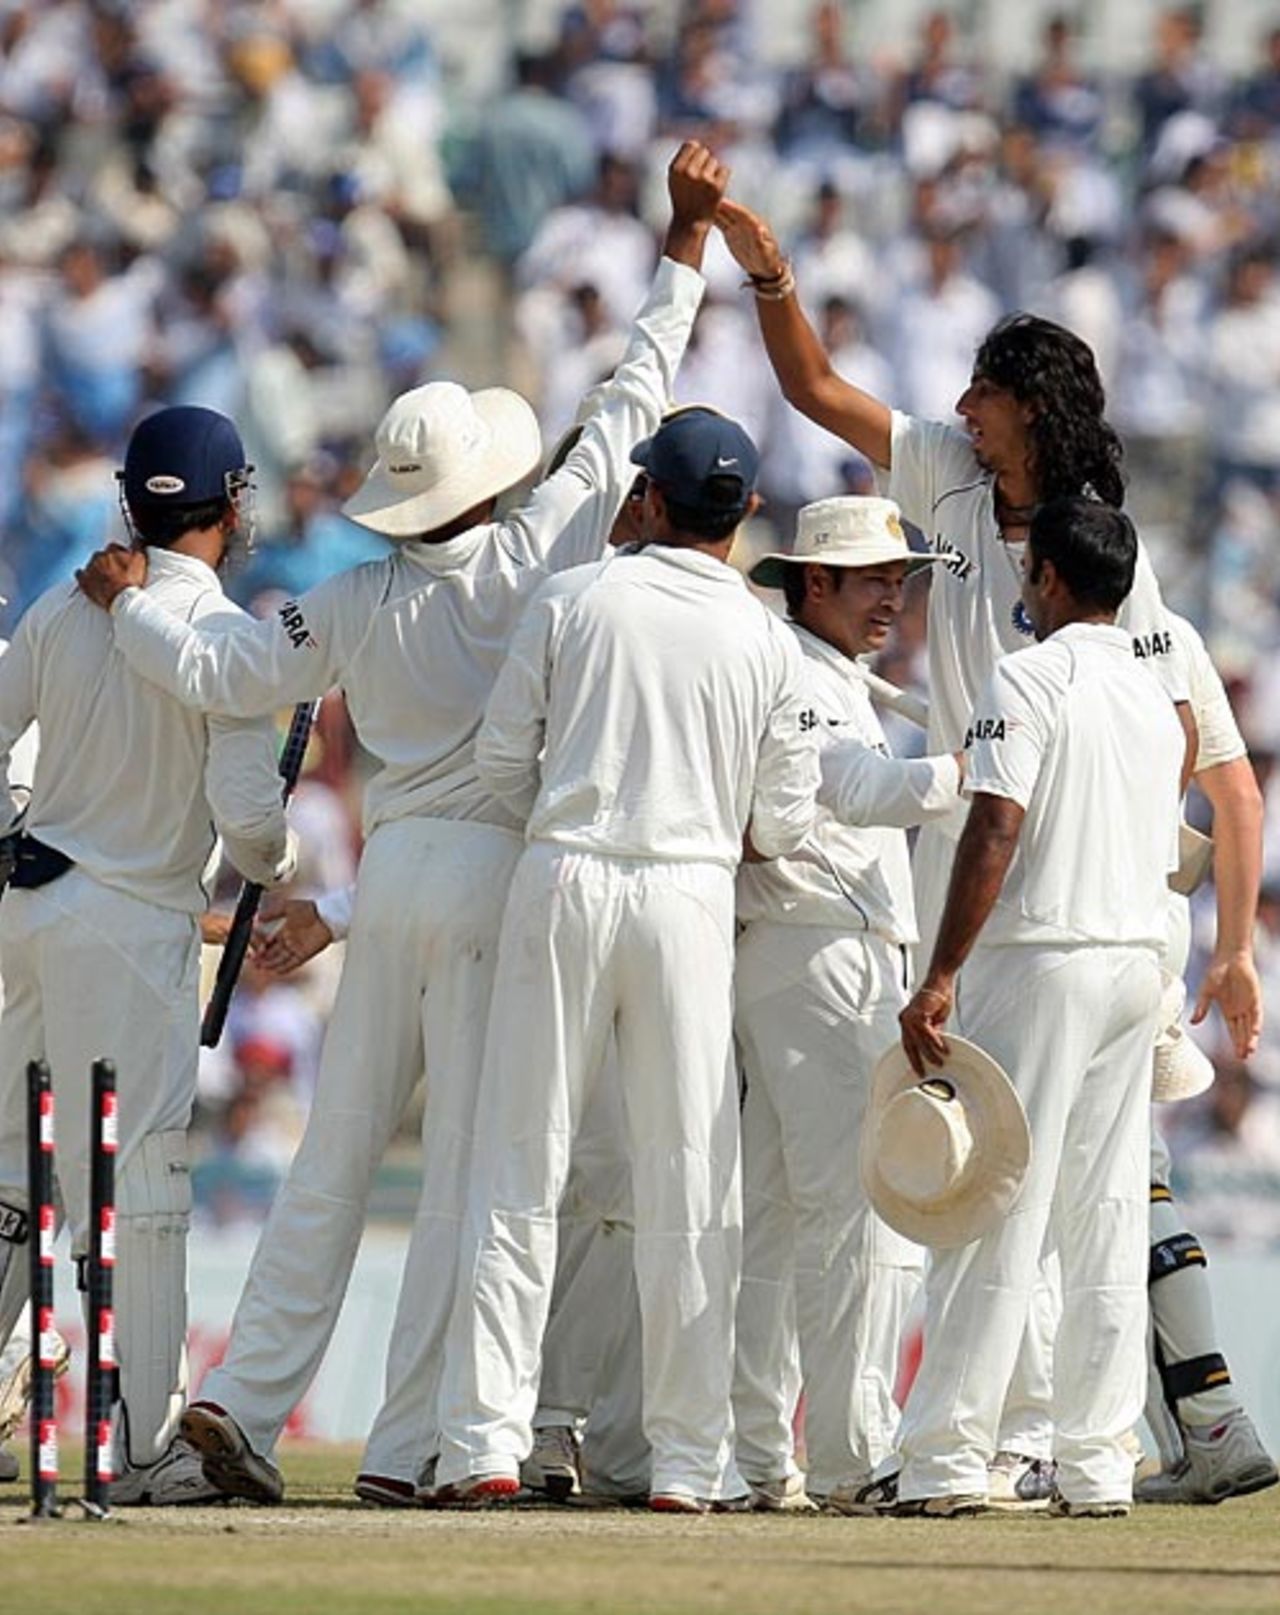 The Indian players celebrate their win in the second Test, India v Australia, 2nd Test, Mohali, 5th day, October 21, 2008